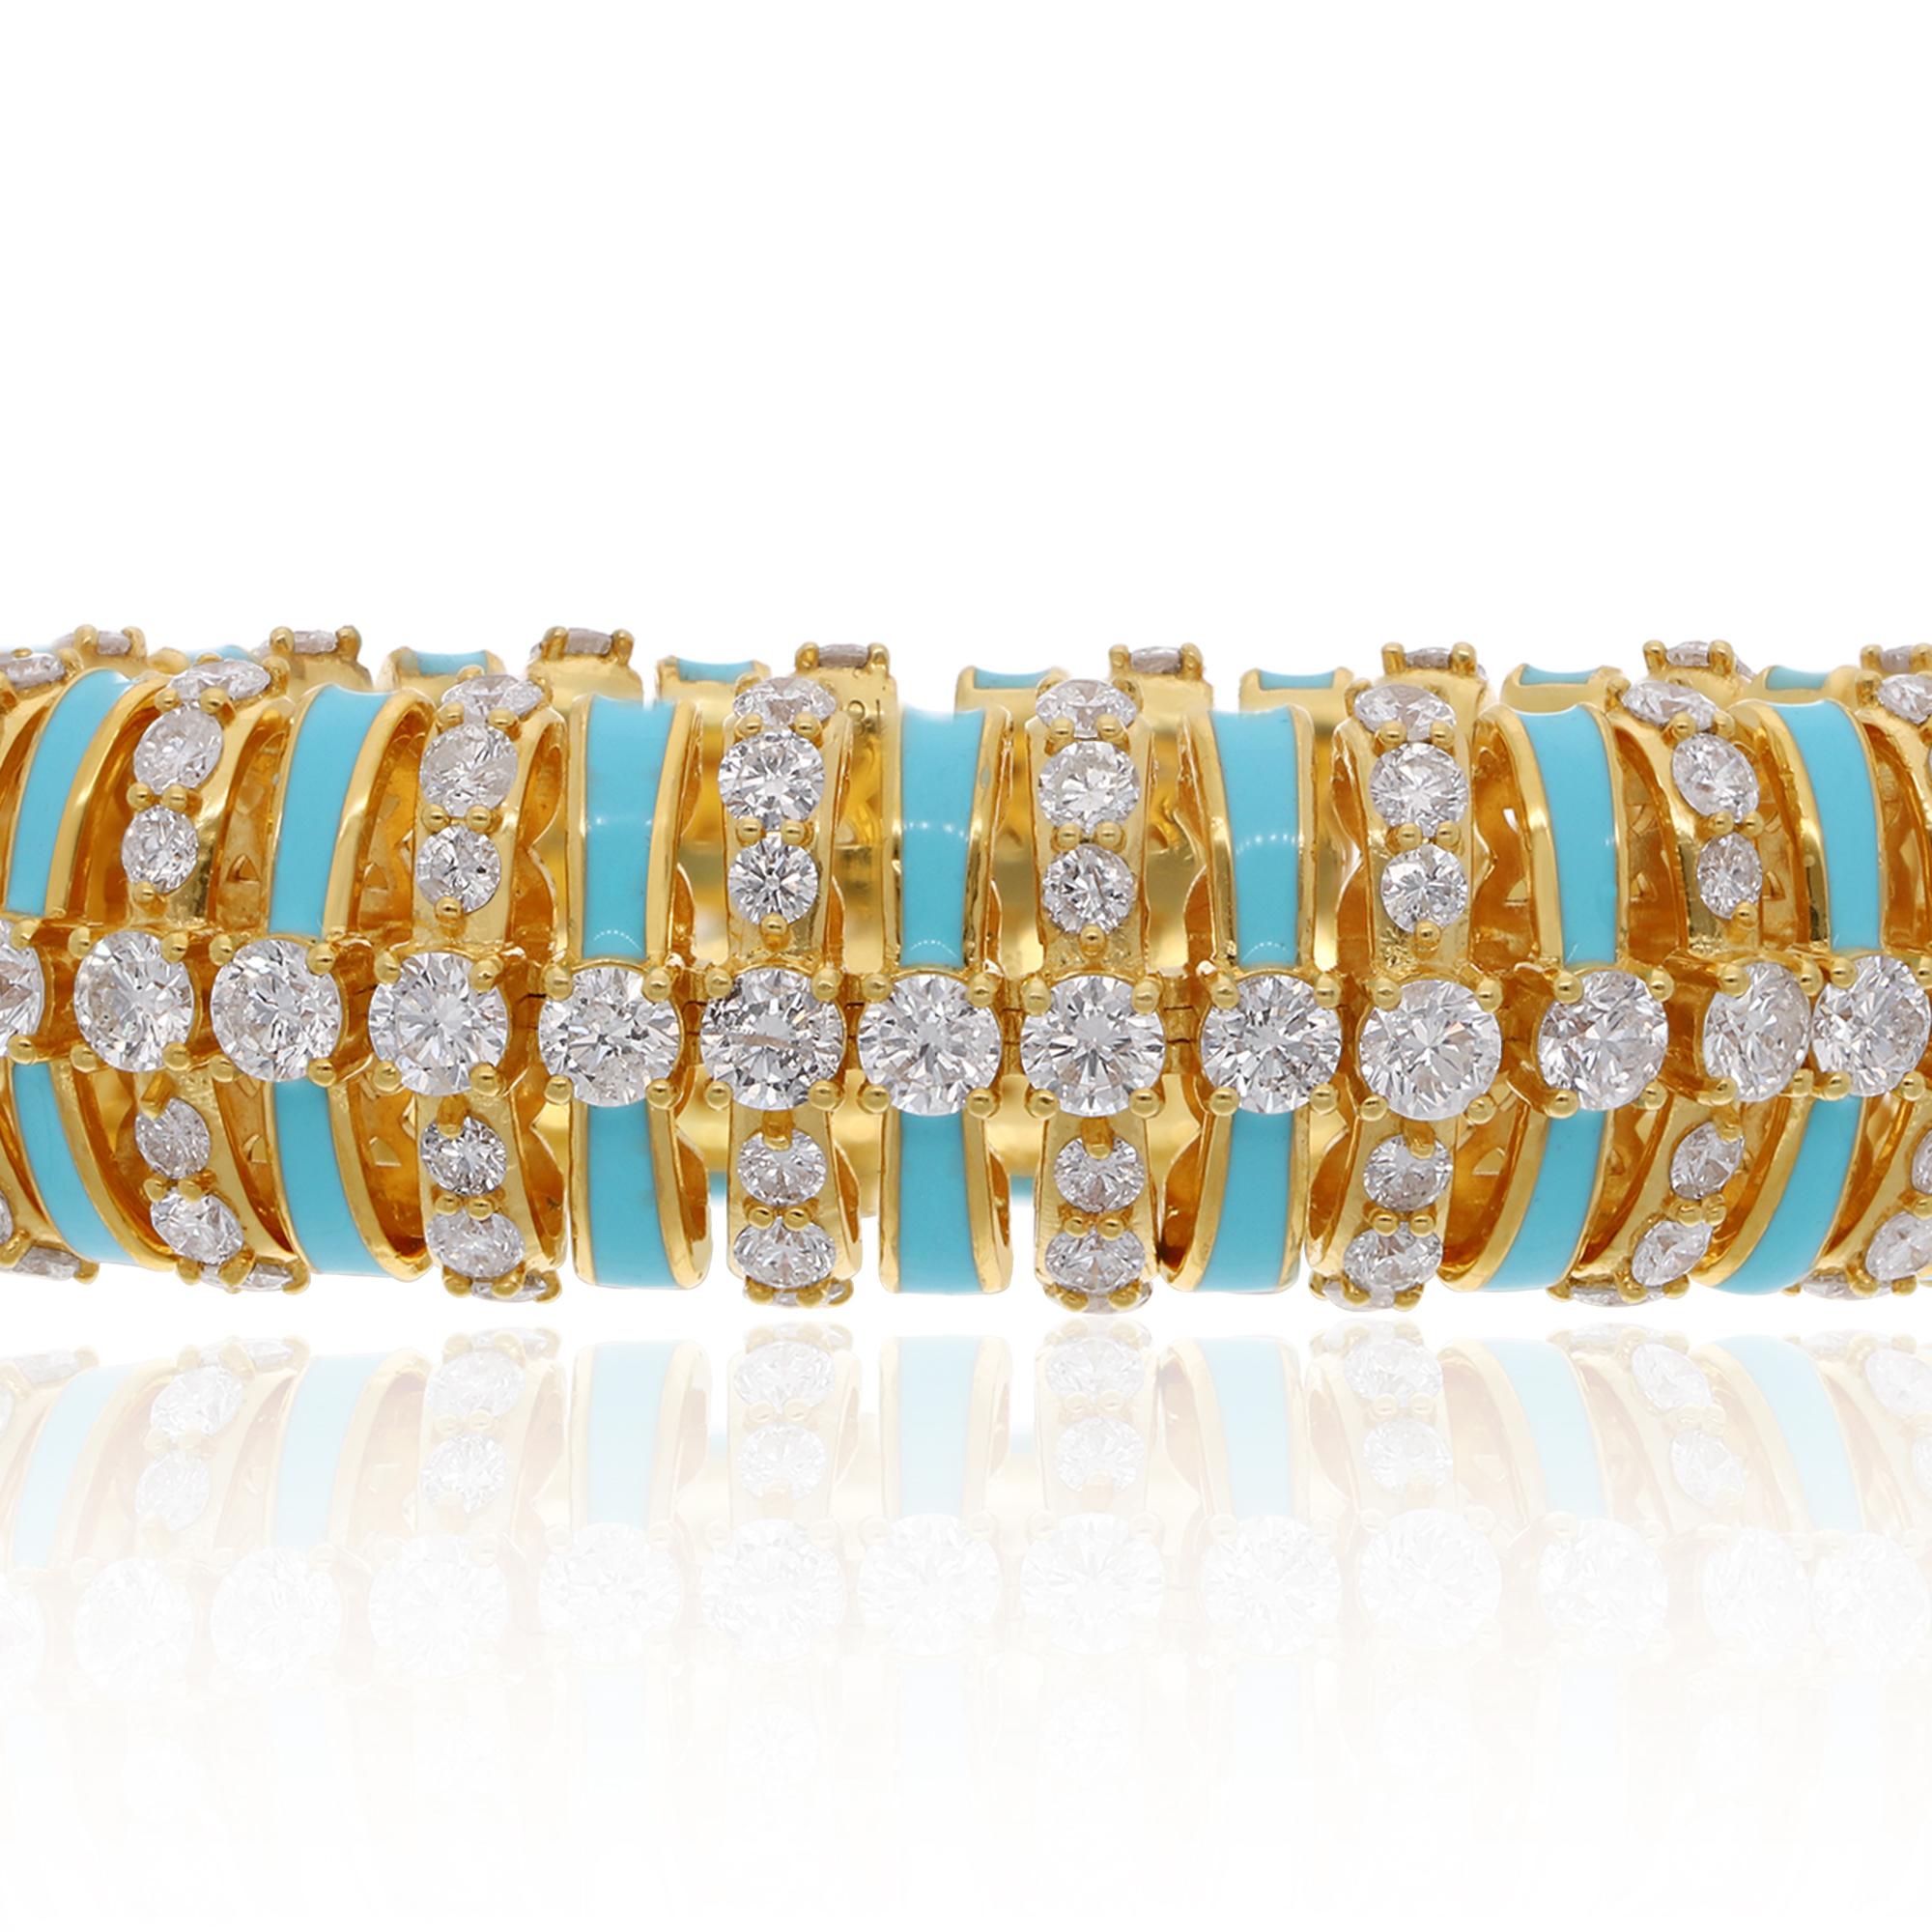 Each meticulous detail of this bracelet speaks to the skill of master artisans, who have imbued it with an unparalleled level of artistry and precision. The enamel work, in vibrant hues, adds a playful yet sophisticated touch, enhancing the overall